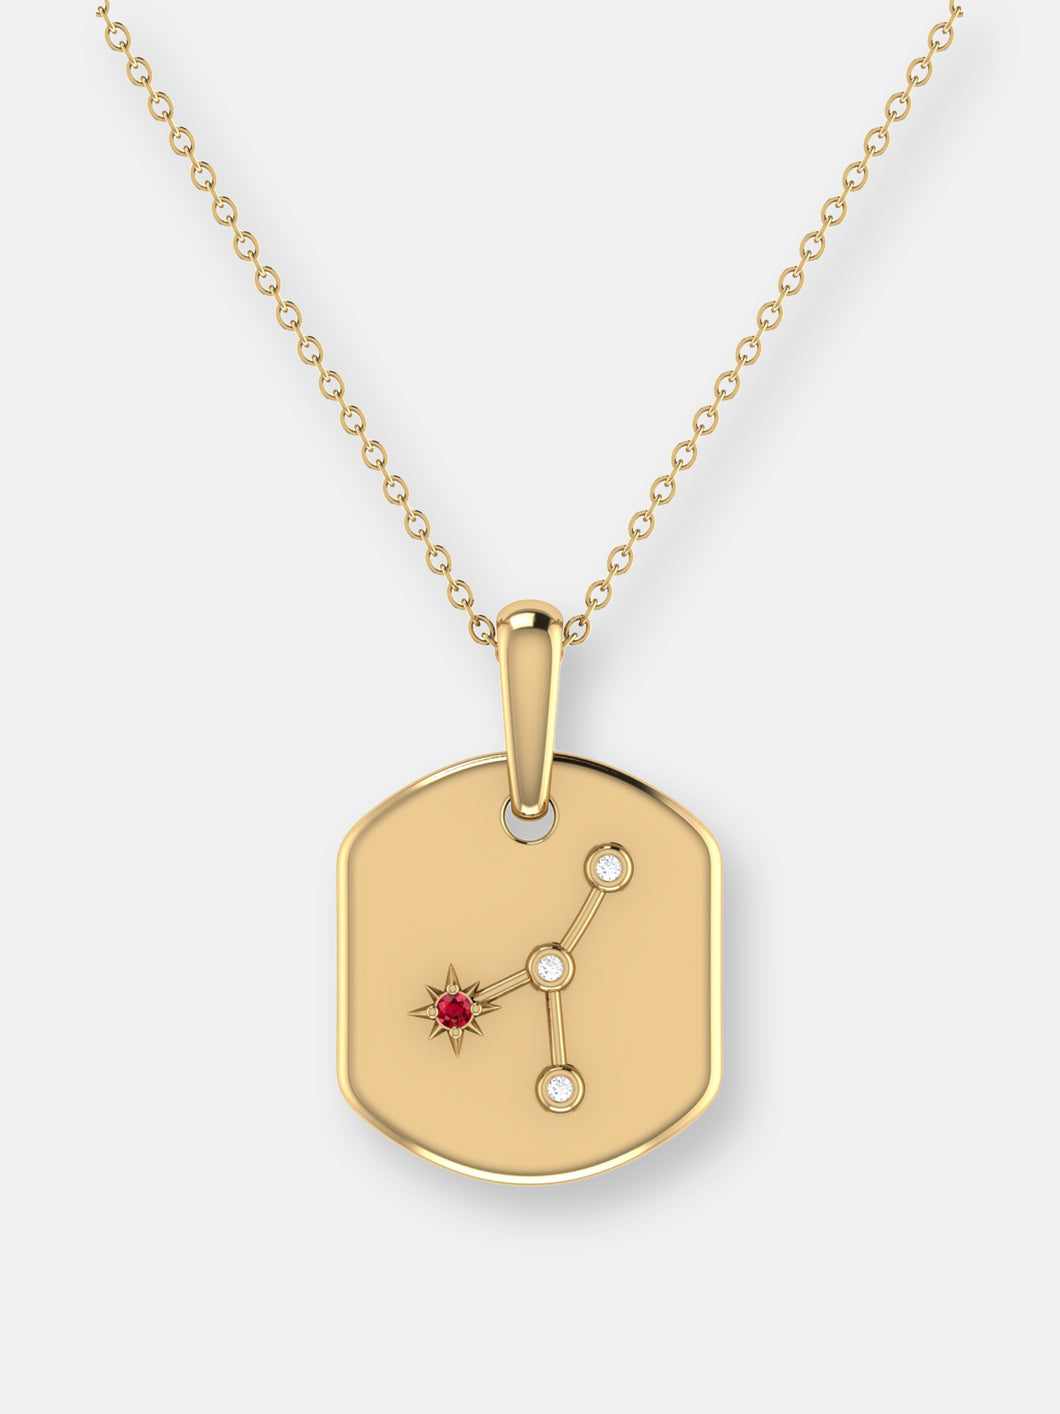 Cancer Crab Ruby & Diamond Constellation Tag Pendant Necklace In 14K Yellow Gold Vermeil On Sterling Silver